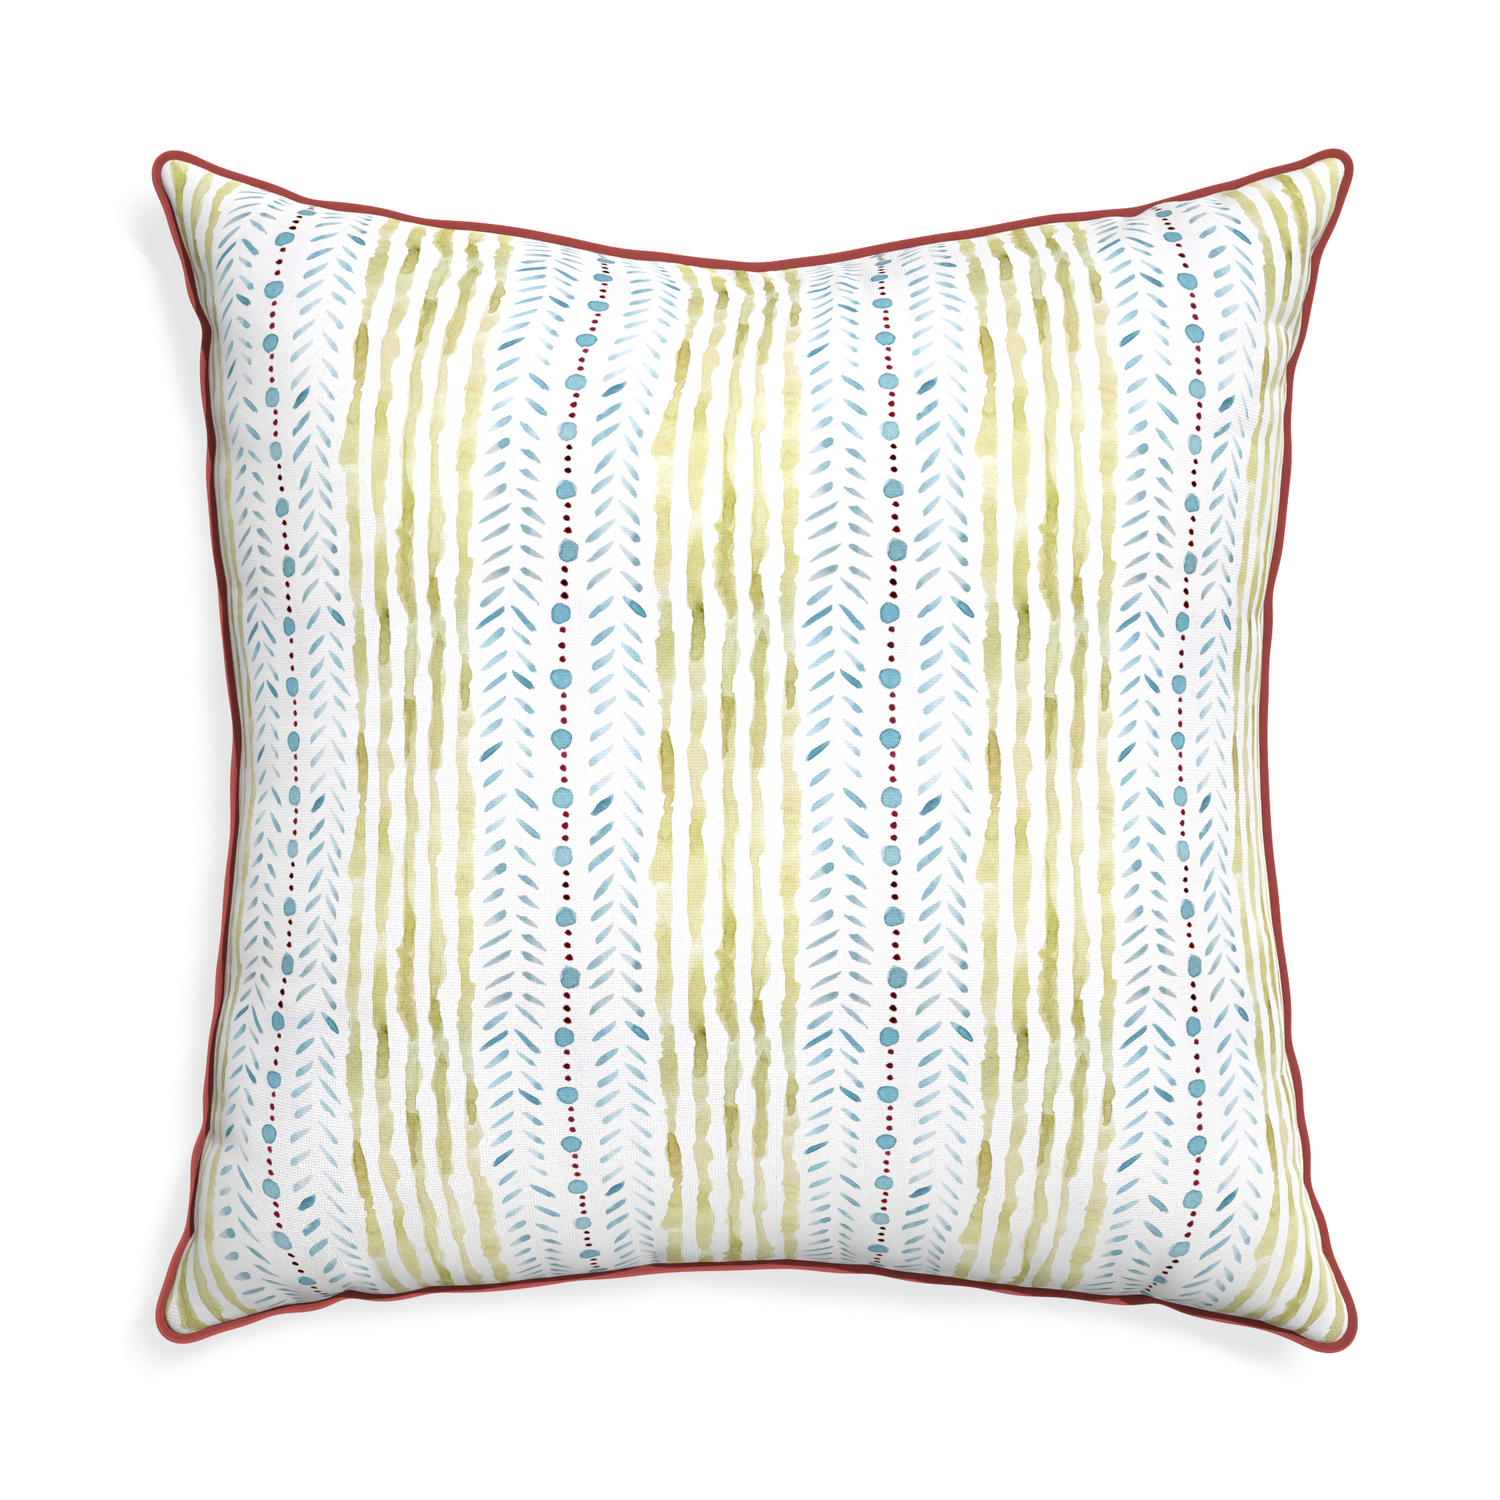 Euro-sham julia custom blue & green stripedpillow with c piping on white background